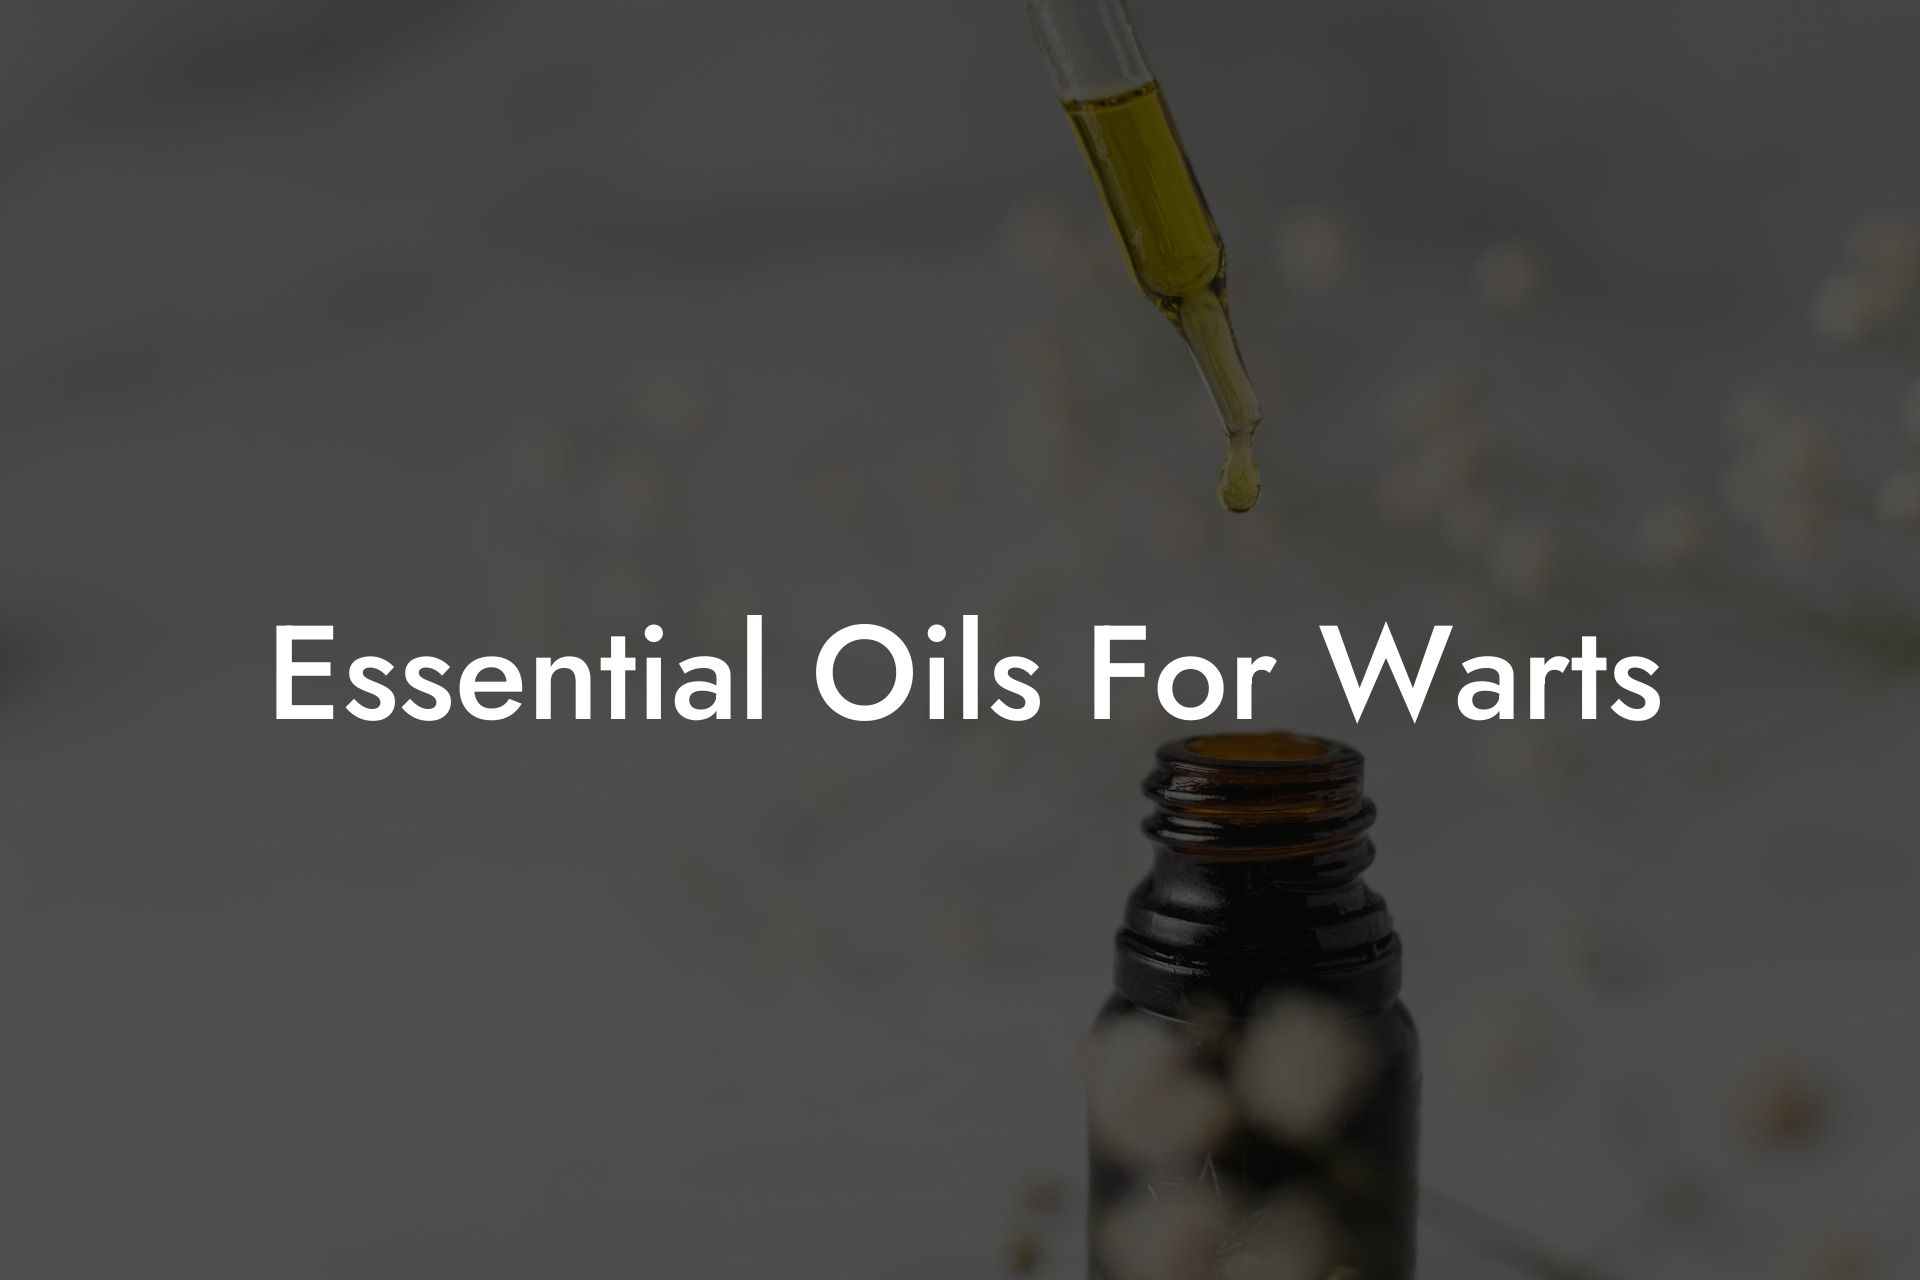 Essential Oils For Warts